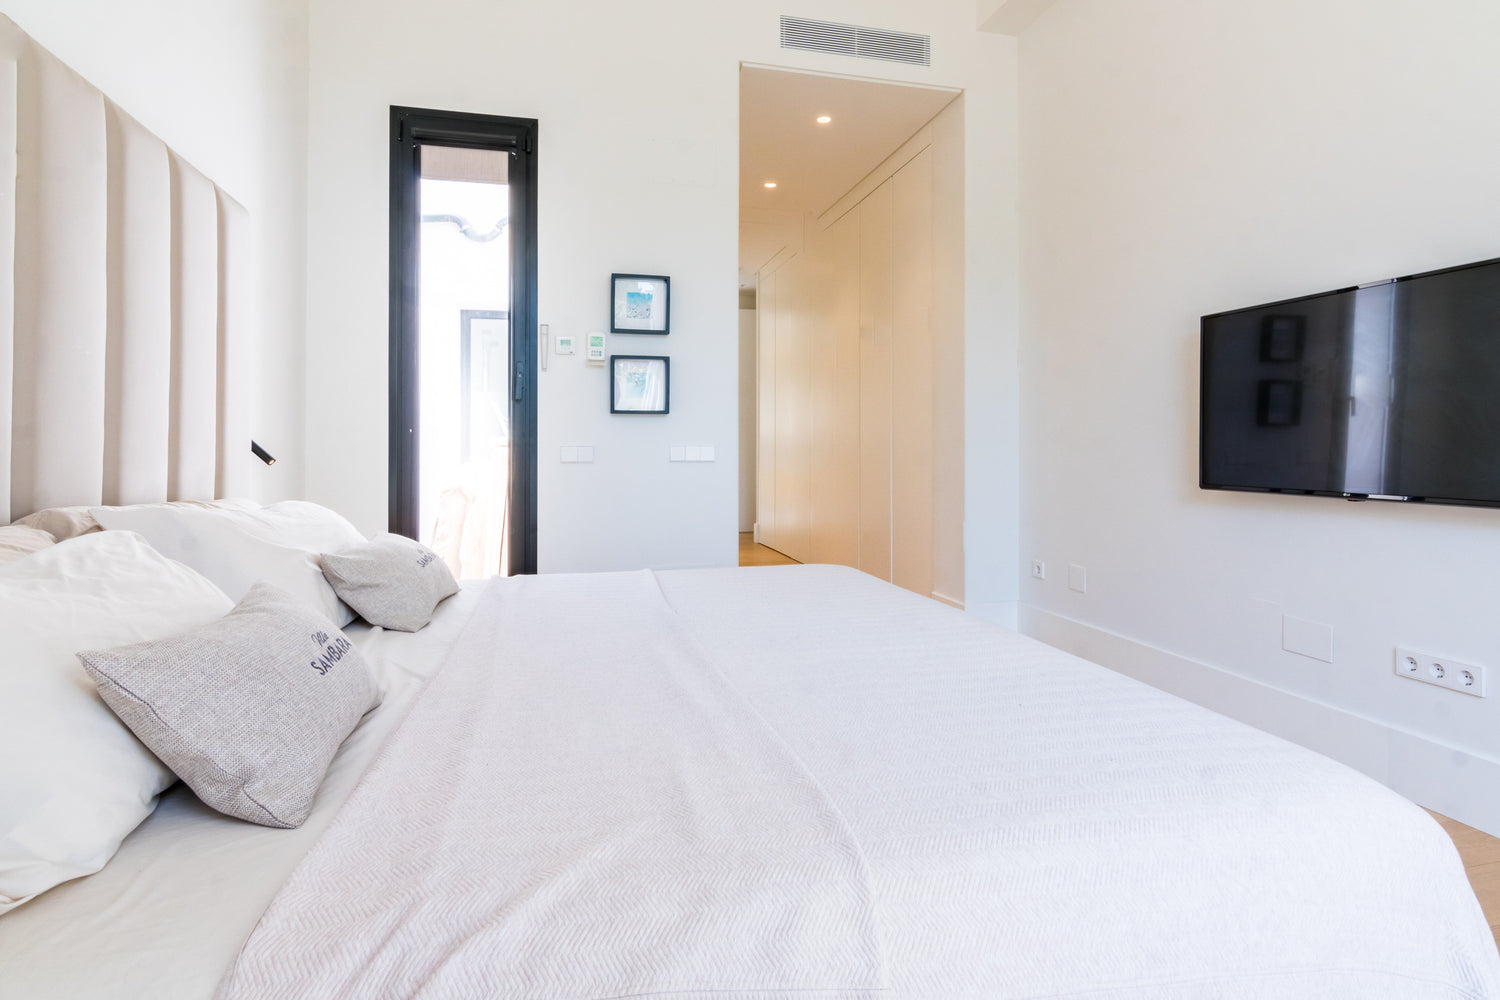 Master bedroom of Villa, Marbella luxury Beach House short term rental, located on the beach side at Marbella´s exclusive Golden Mile just by beach